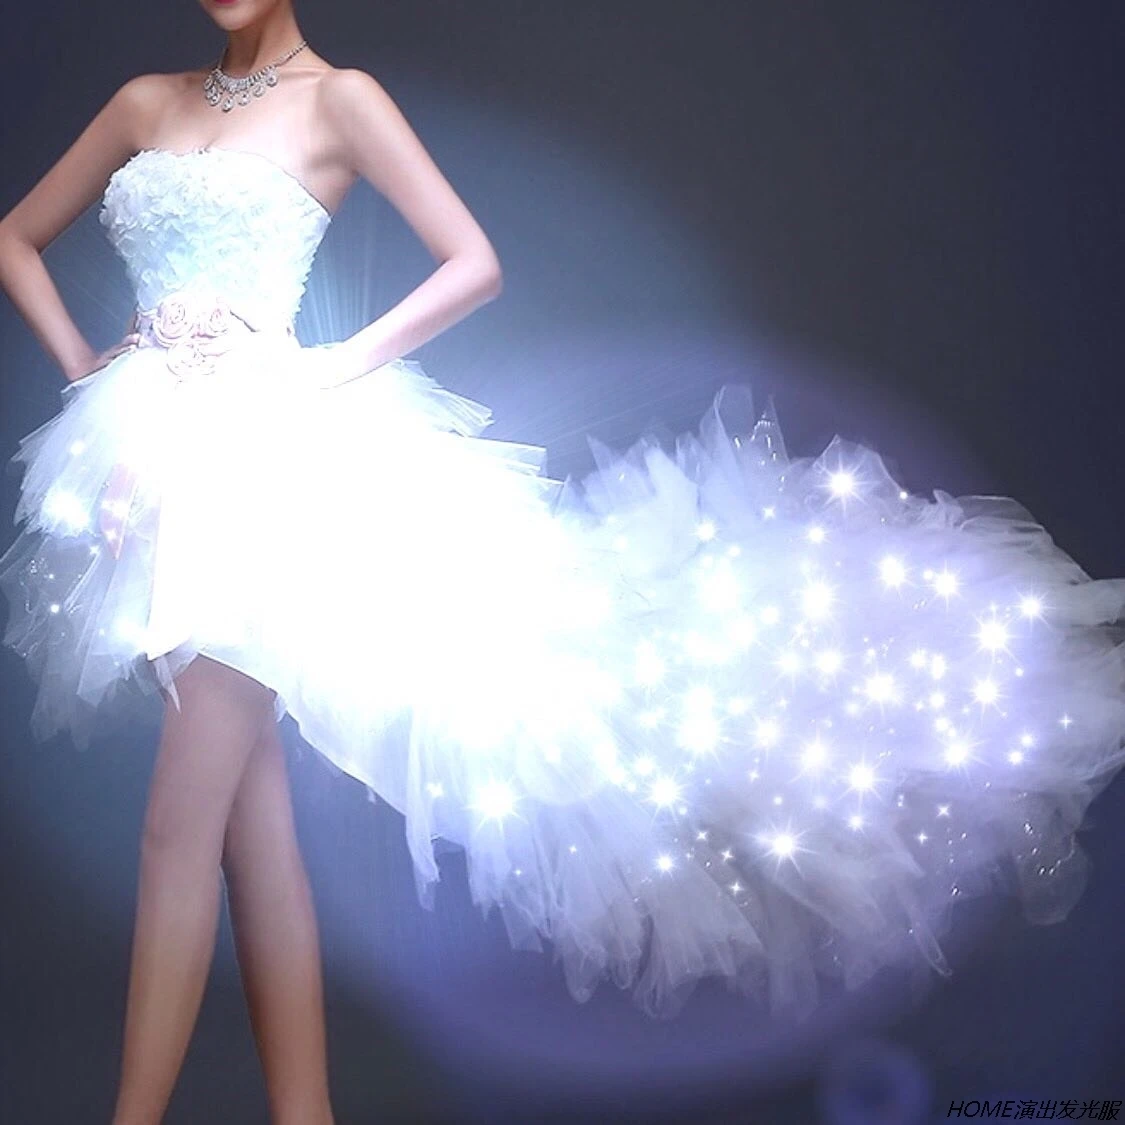 Lumious white Dresses Led Dress Sexy Women Party Wear Led Light Up Cloth Dance Costume